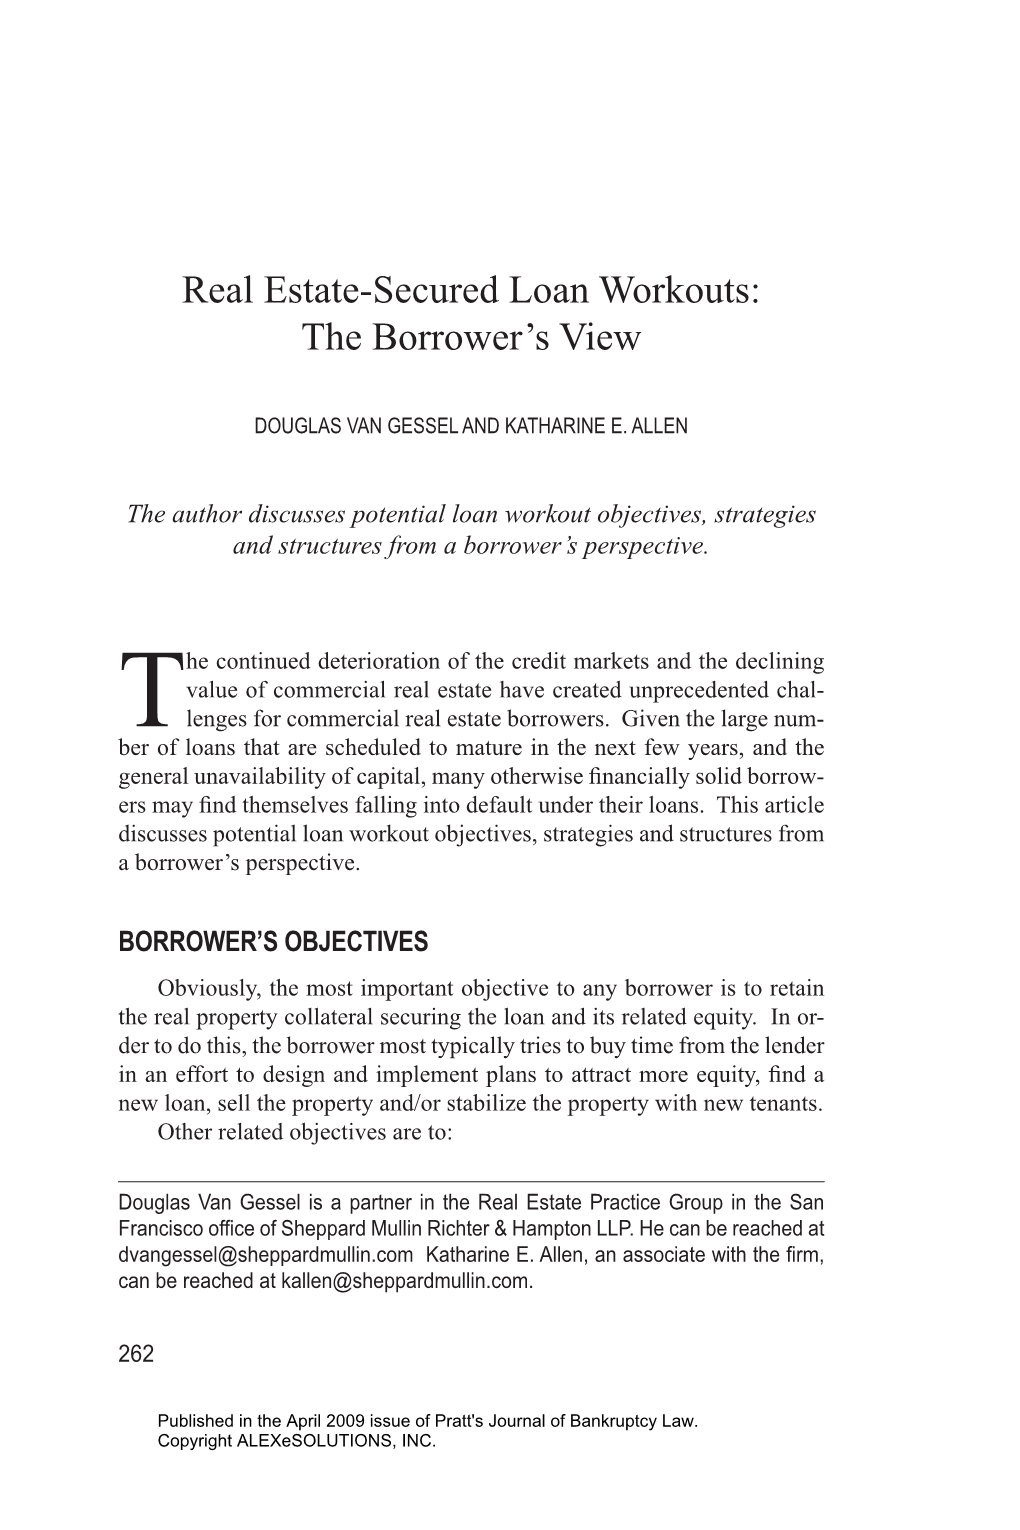 Real Estate-Secured Loan Workouts: the Borrower's View